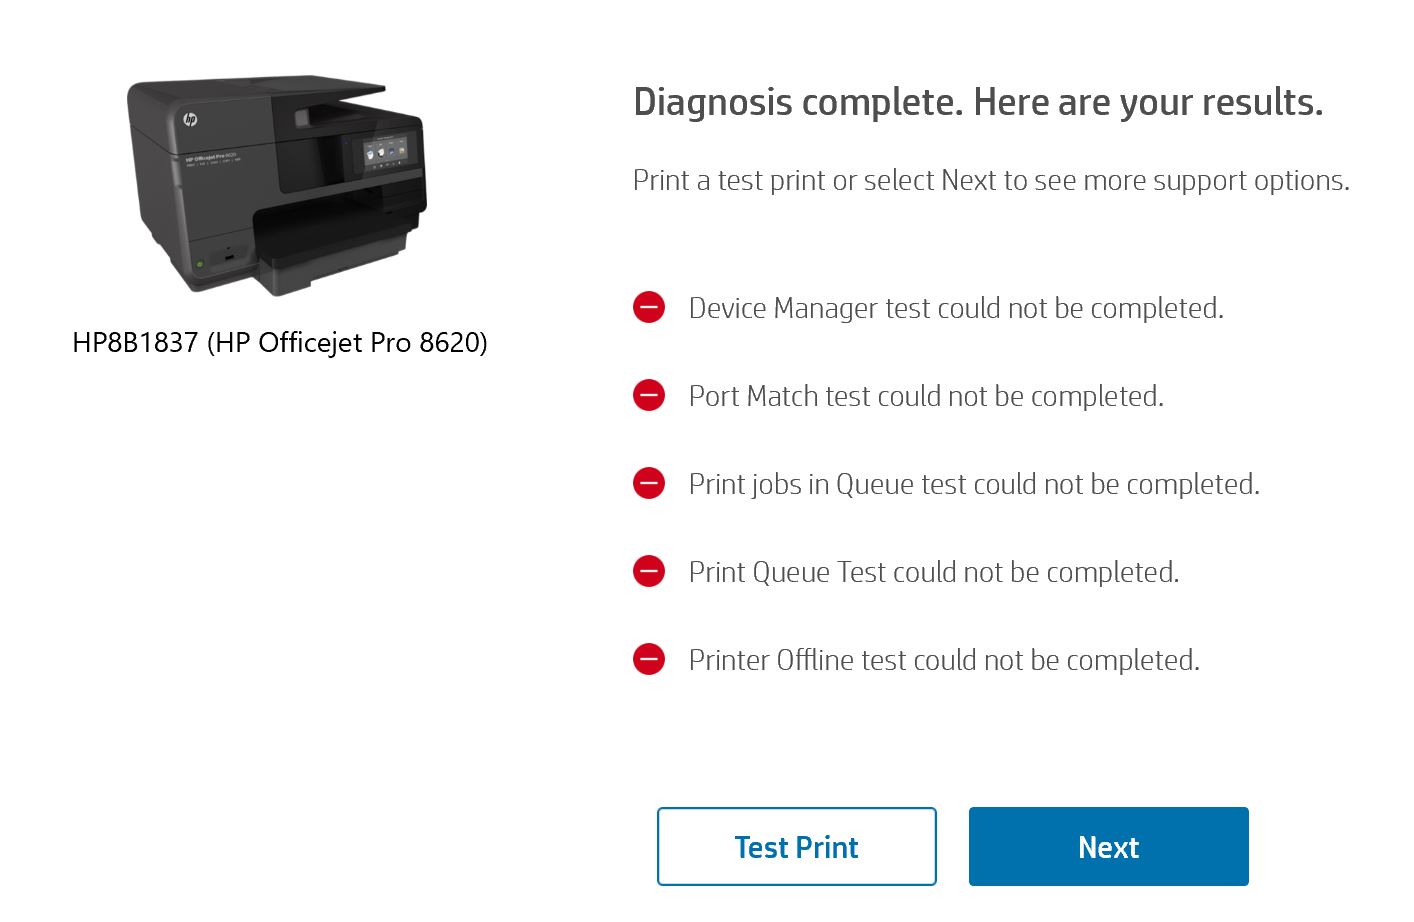 Lost all printers after automatic update to Windows 10 versi... - HP  Support Community - 6750638